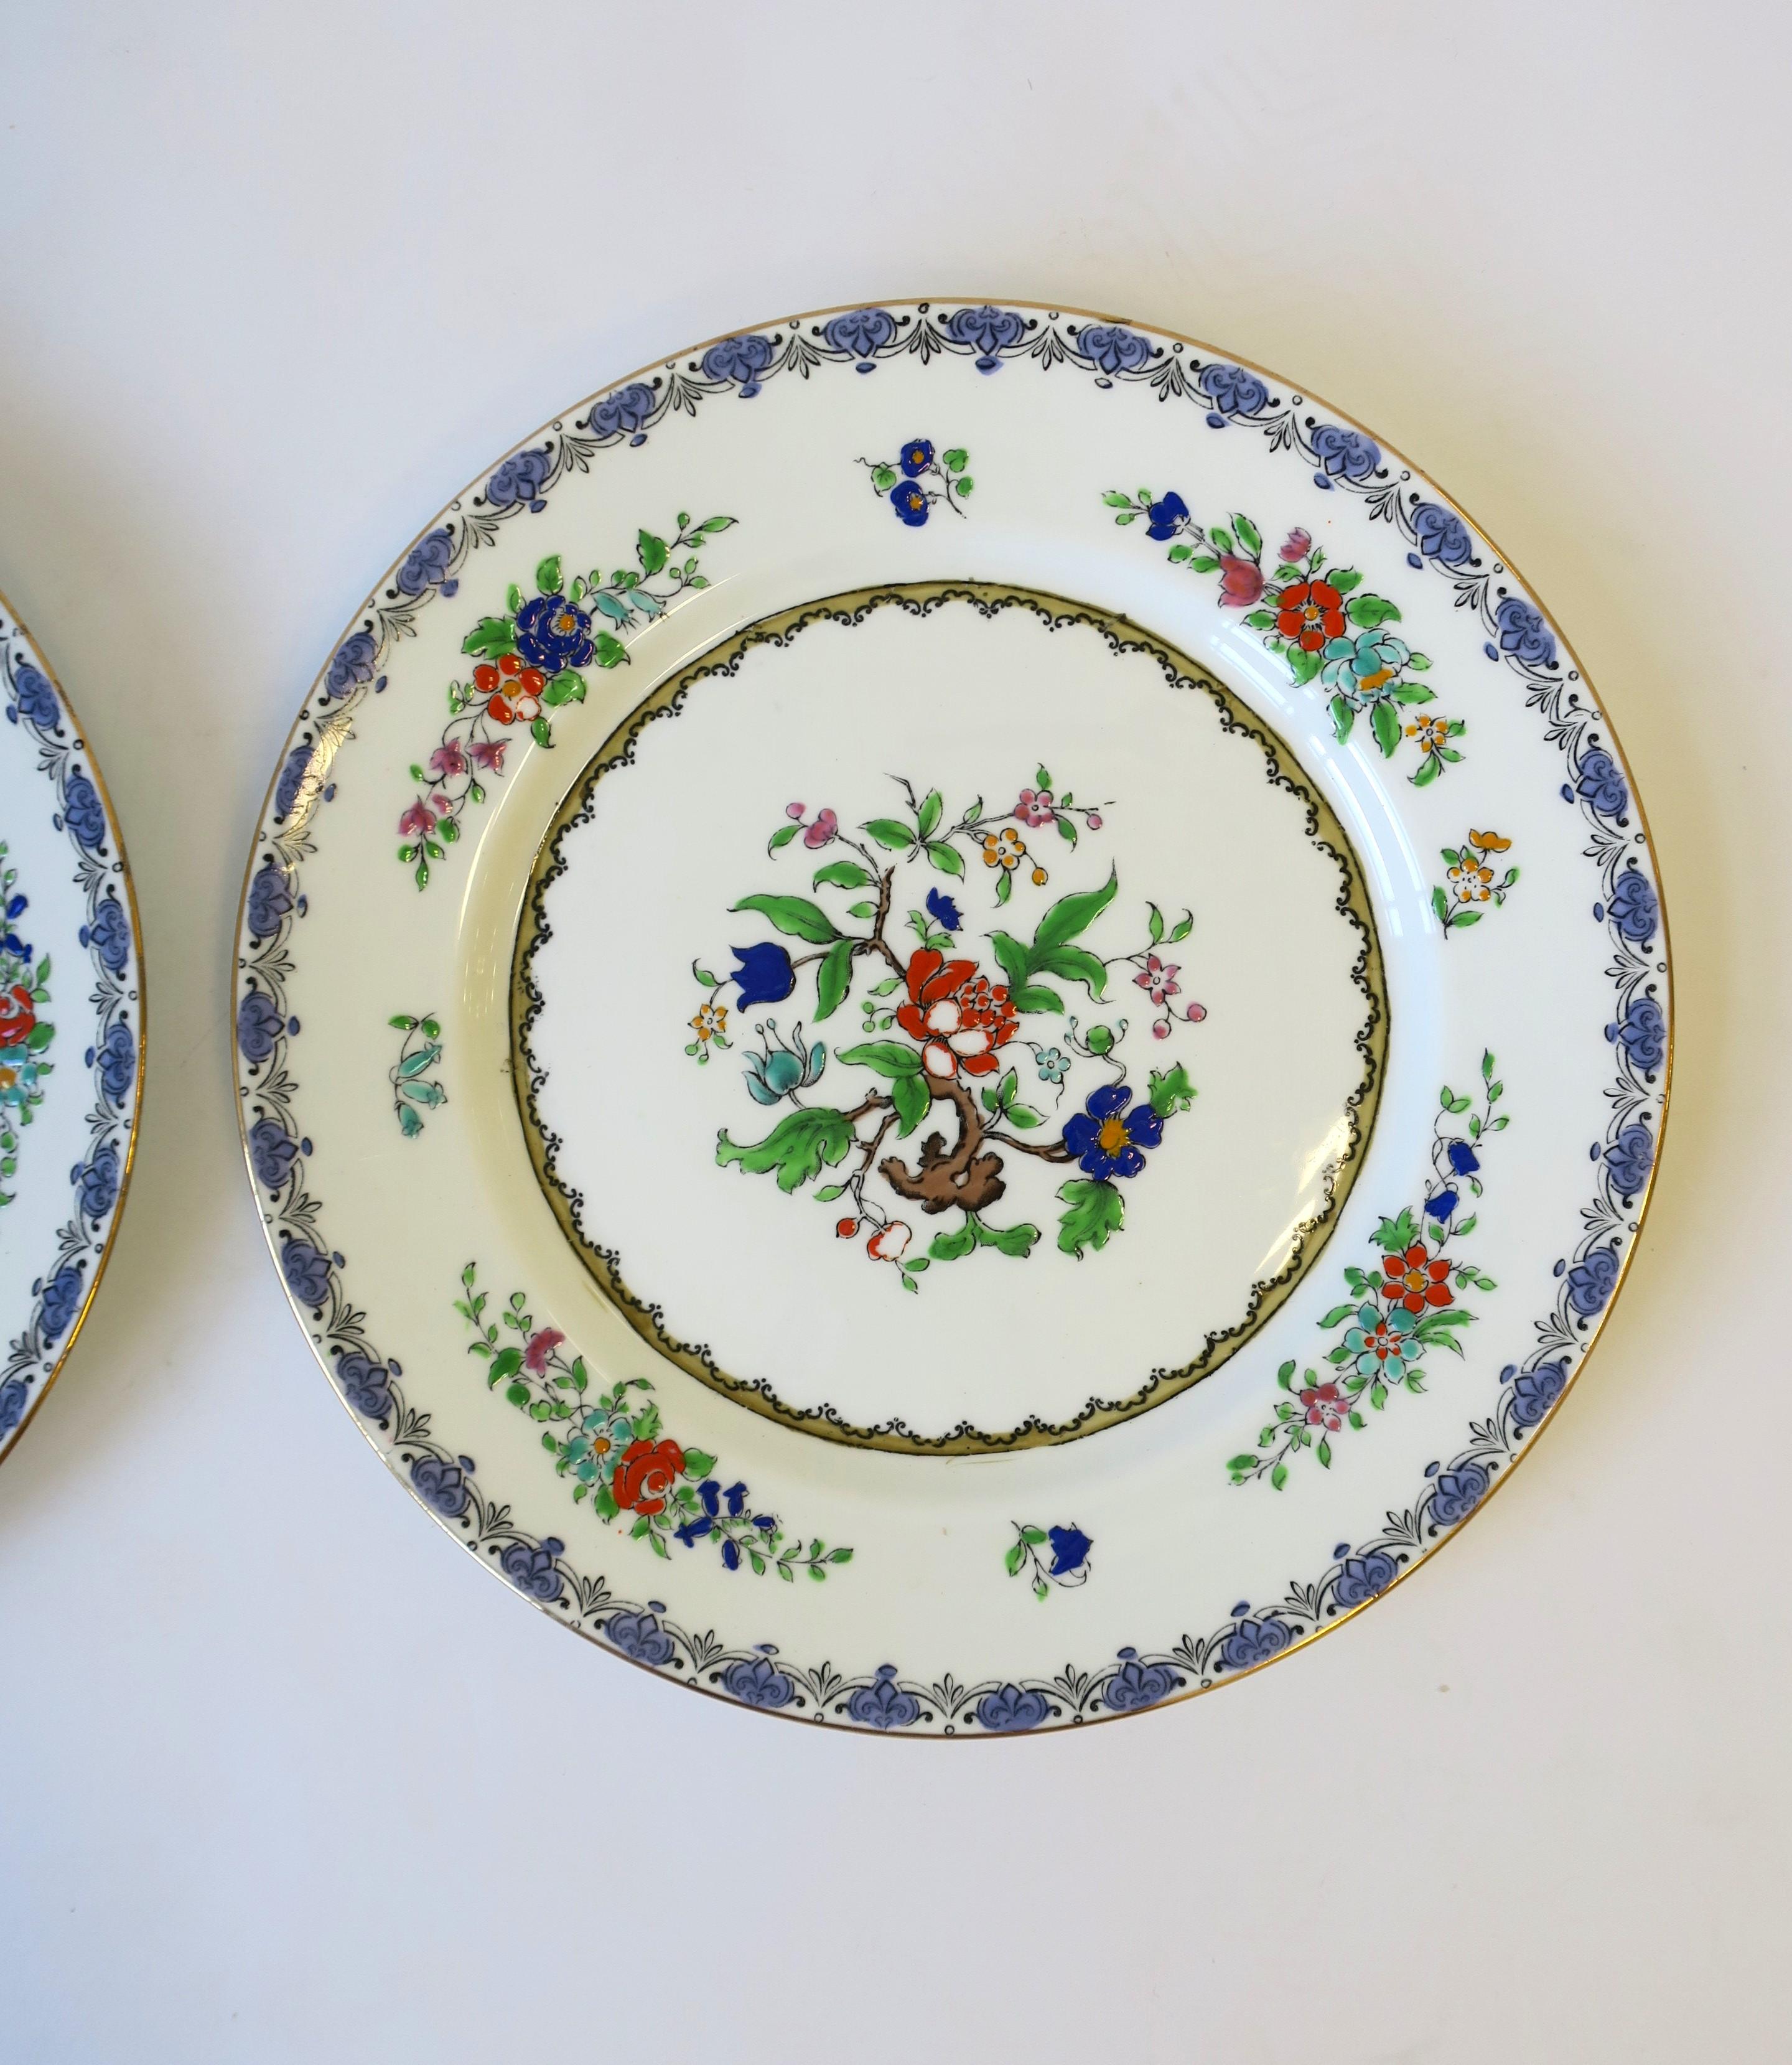 English Adderley Ware Porcelain Plates, Pair For Sale 1